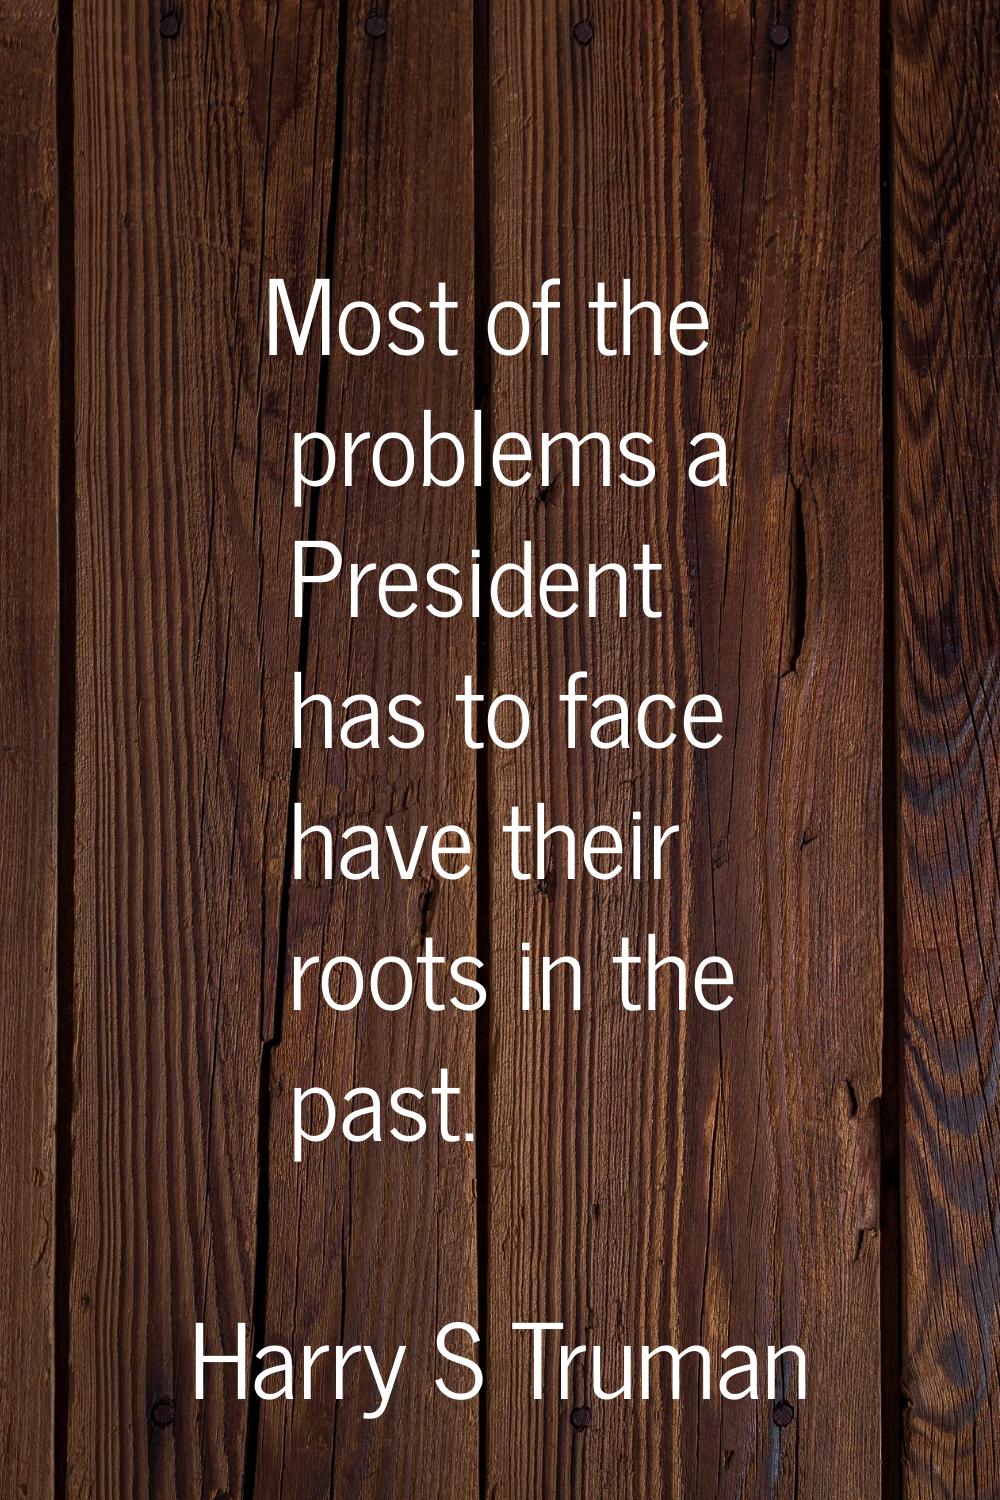 Most of the problems a President has to face have their roots in the past.